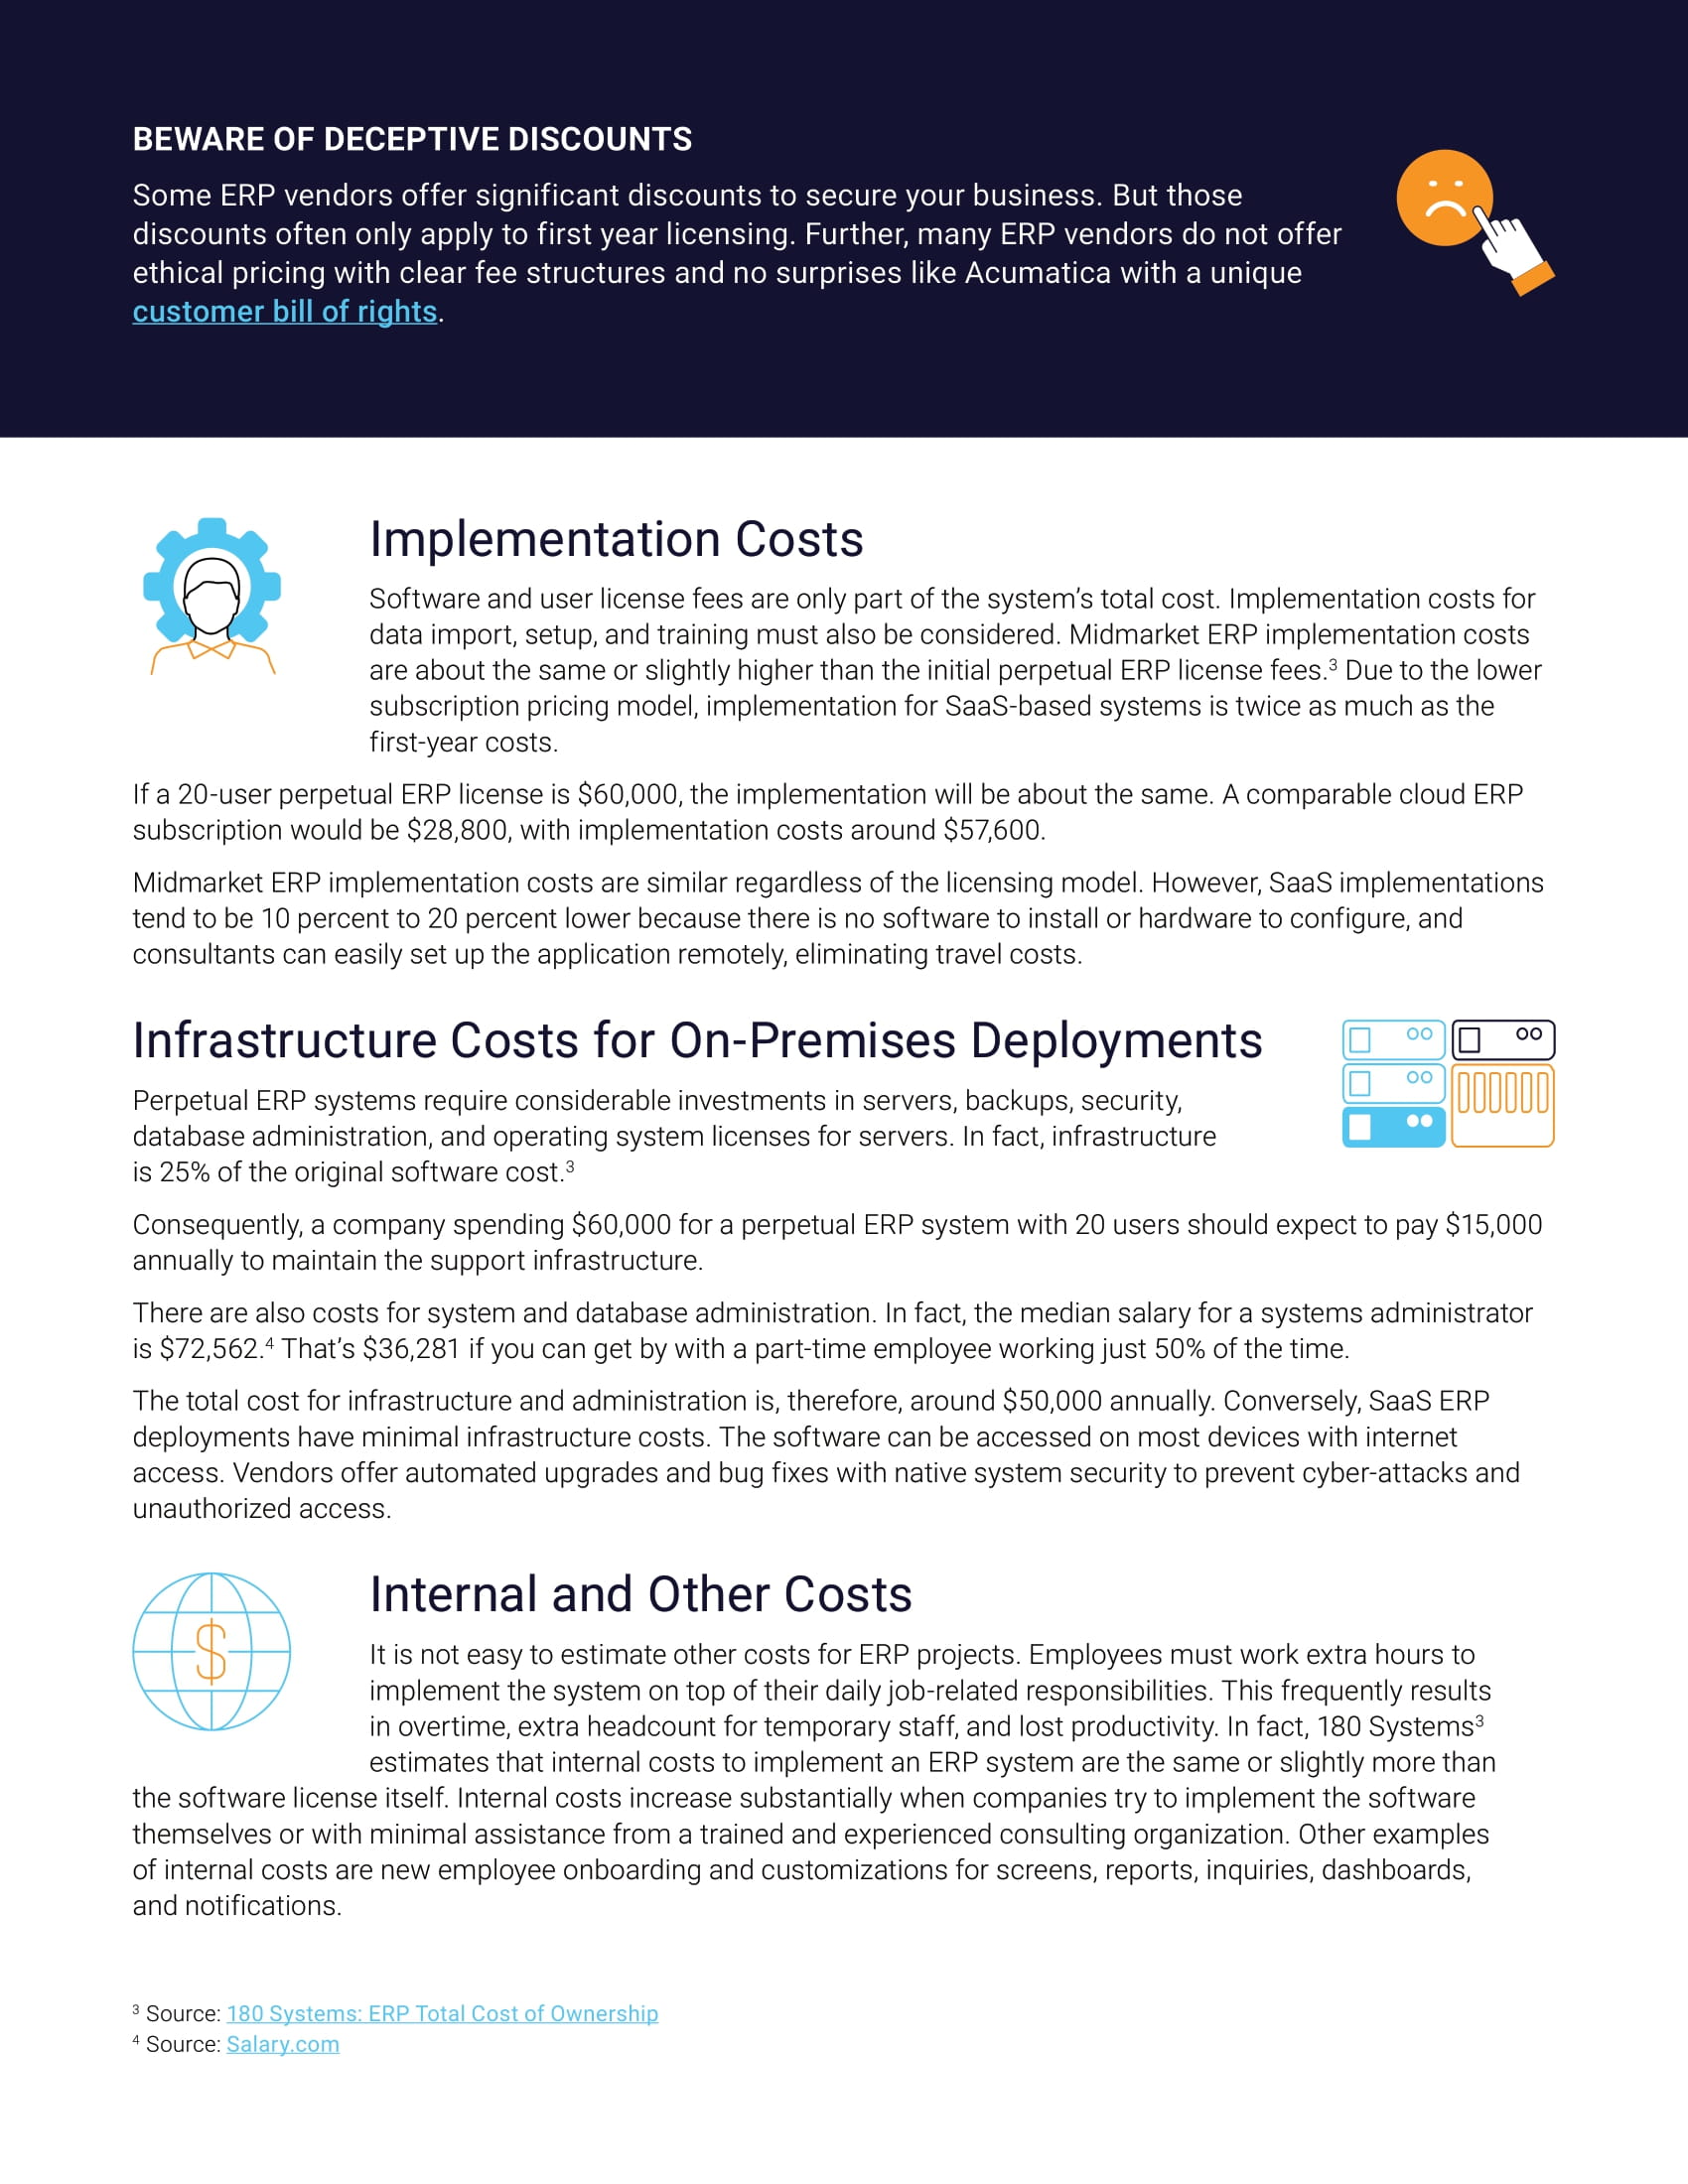 How to Assess ERP Software Total Cost of Ownership (TCO), page 2